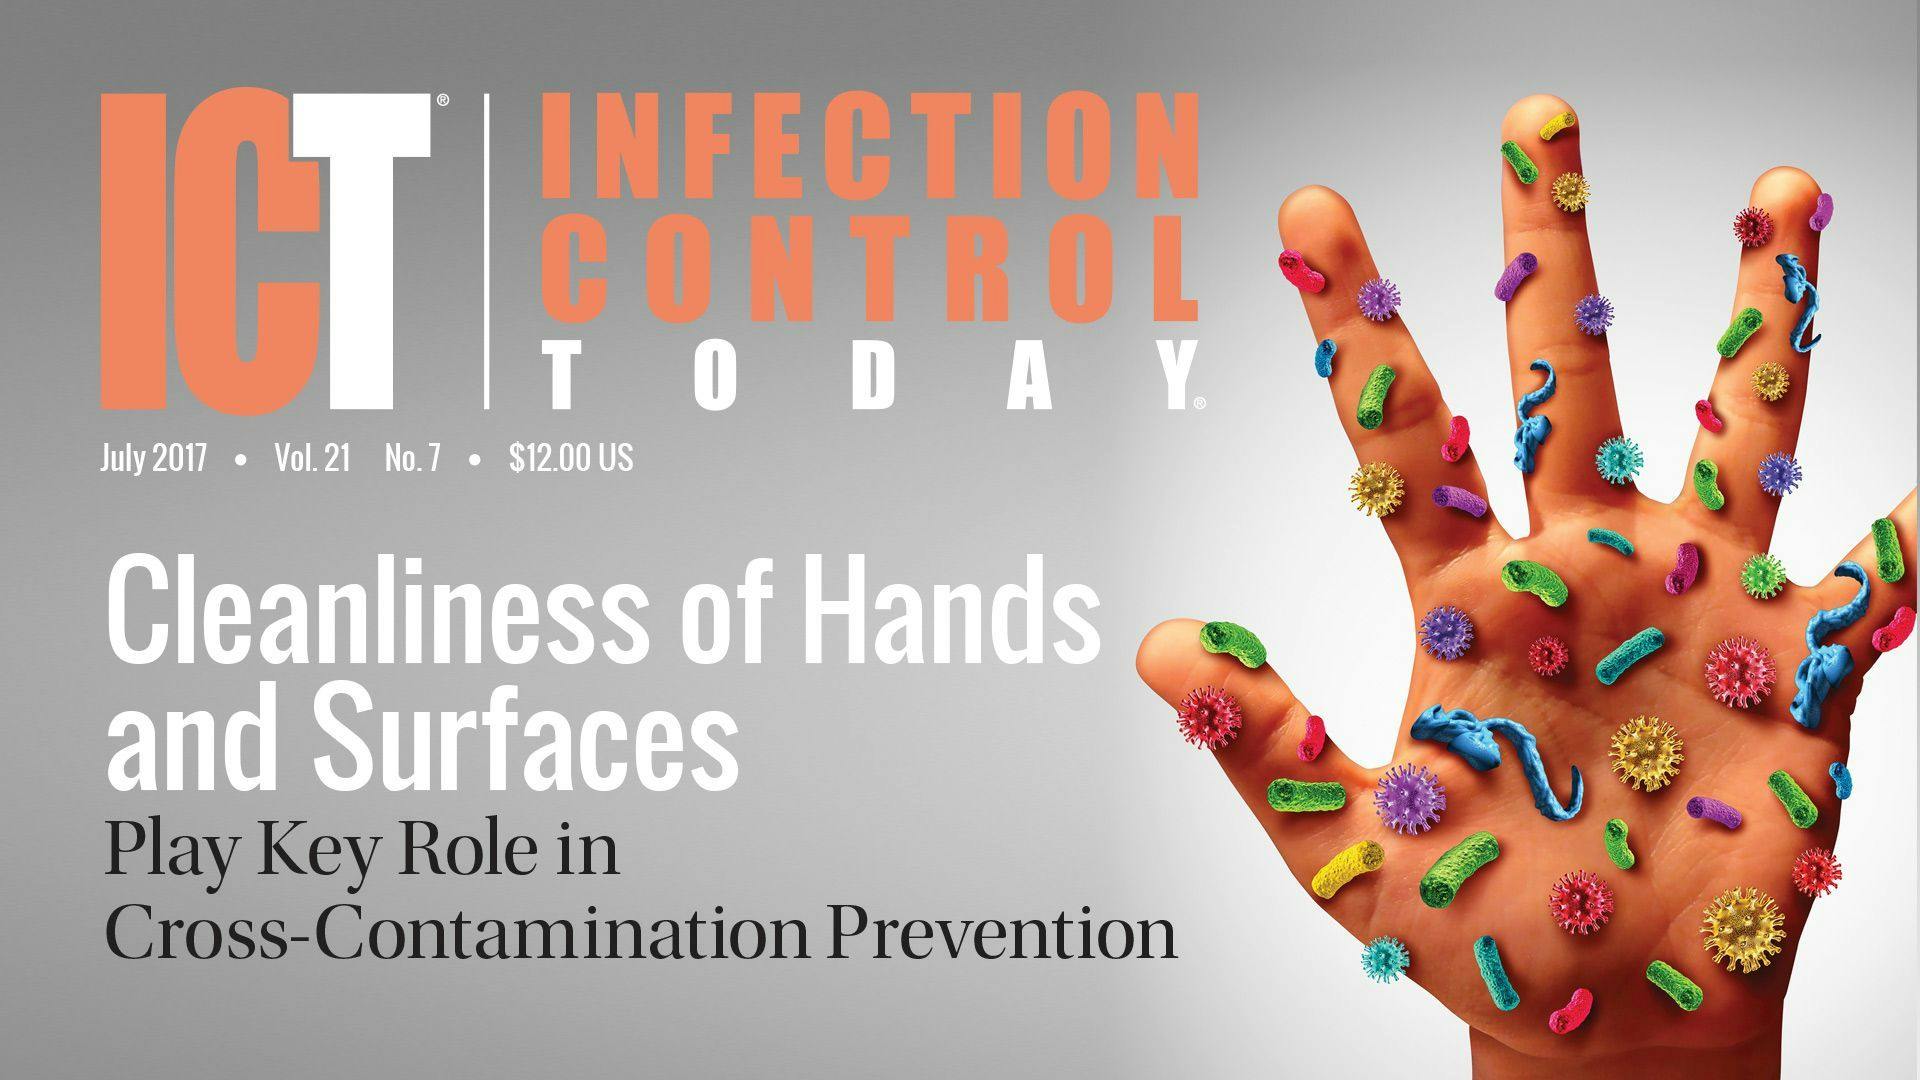 Cleanliness of Hands and Surfaces Plays Key Role in Cross-Contamination Prevention